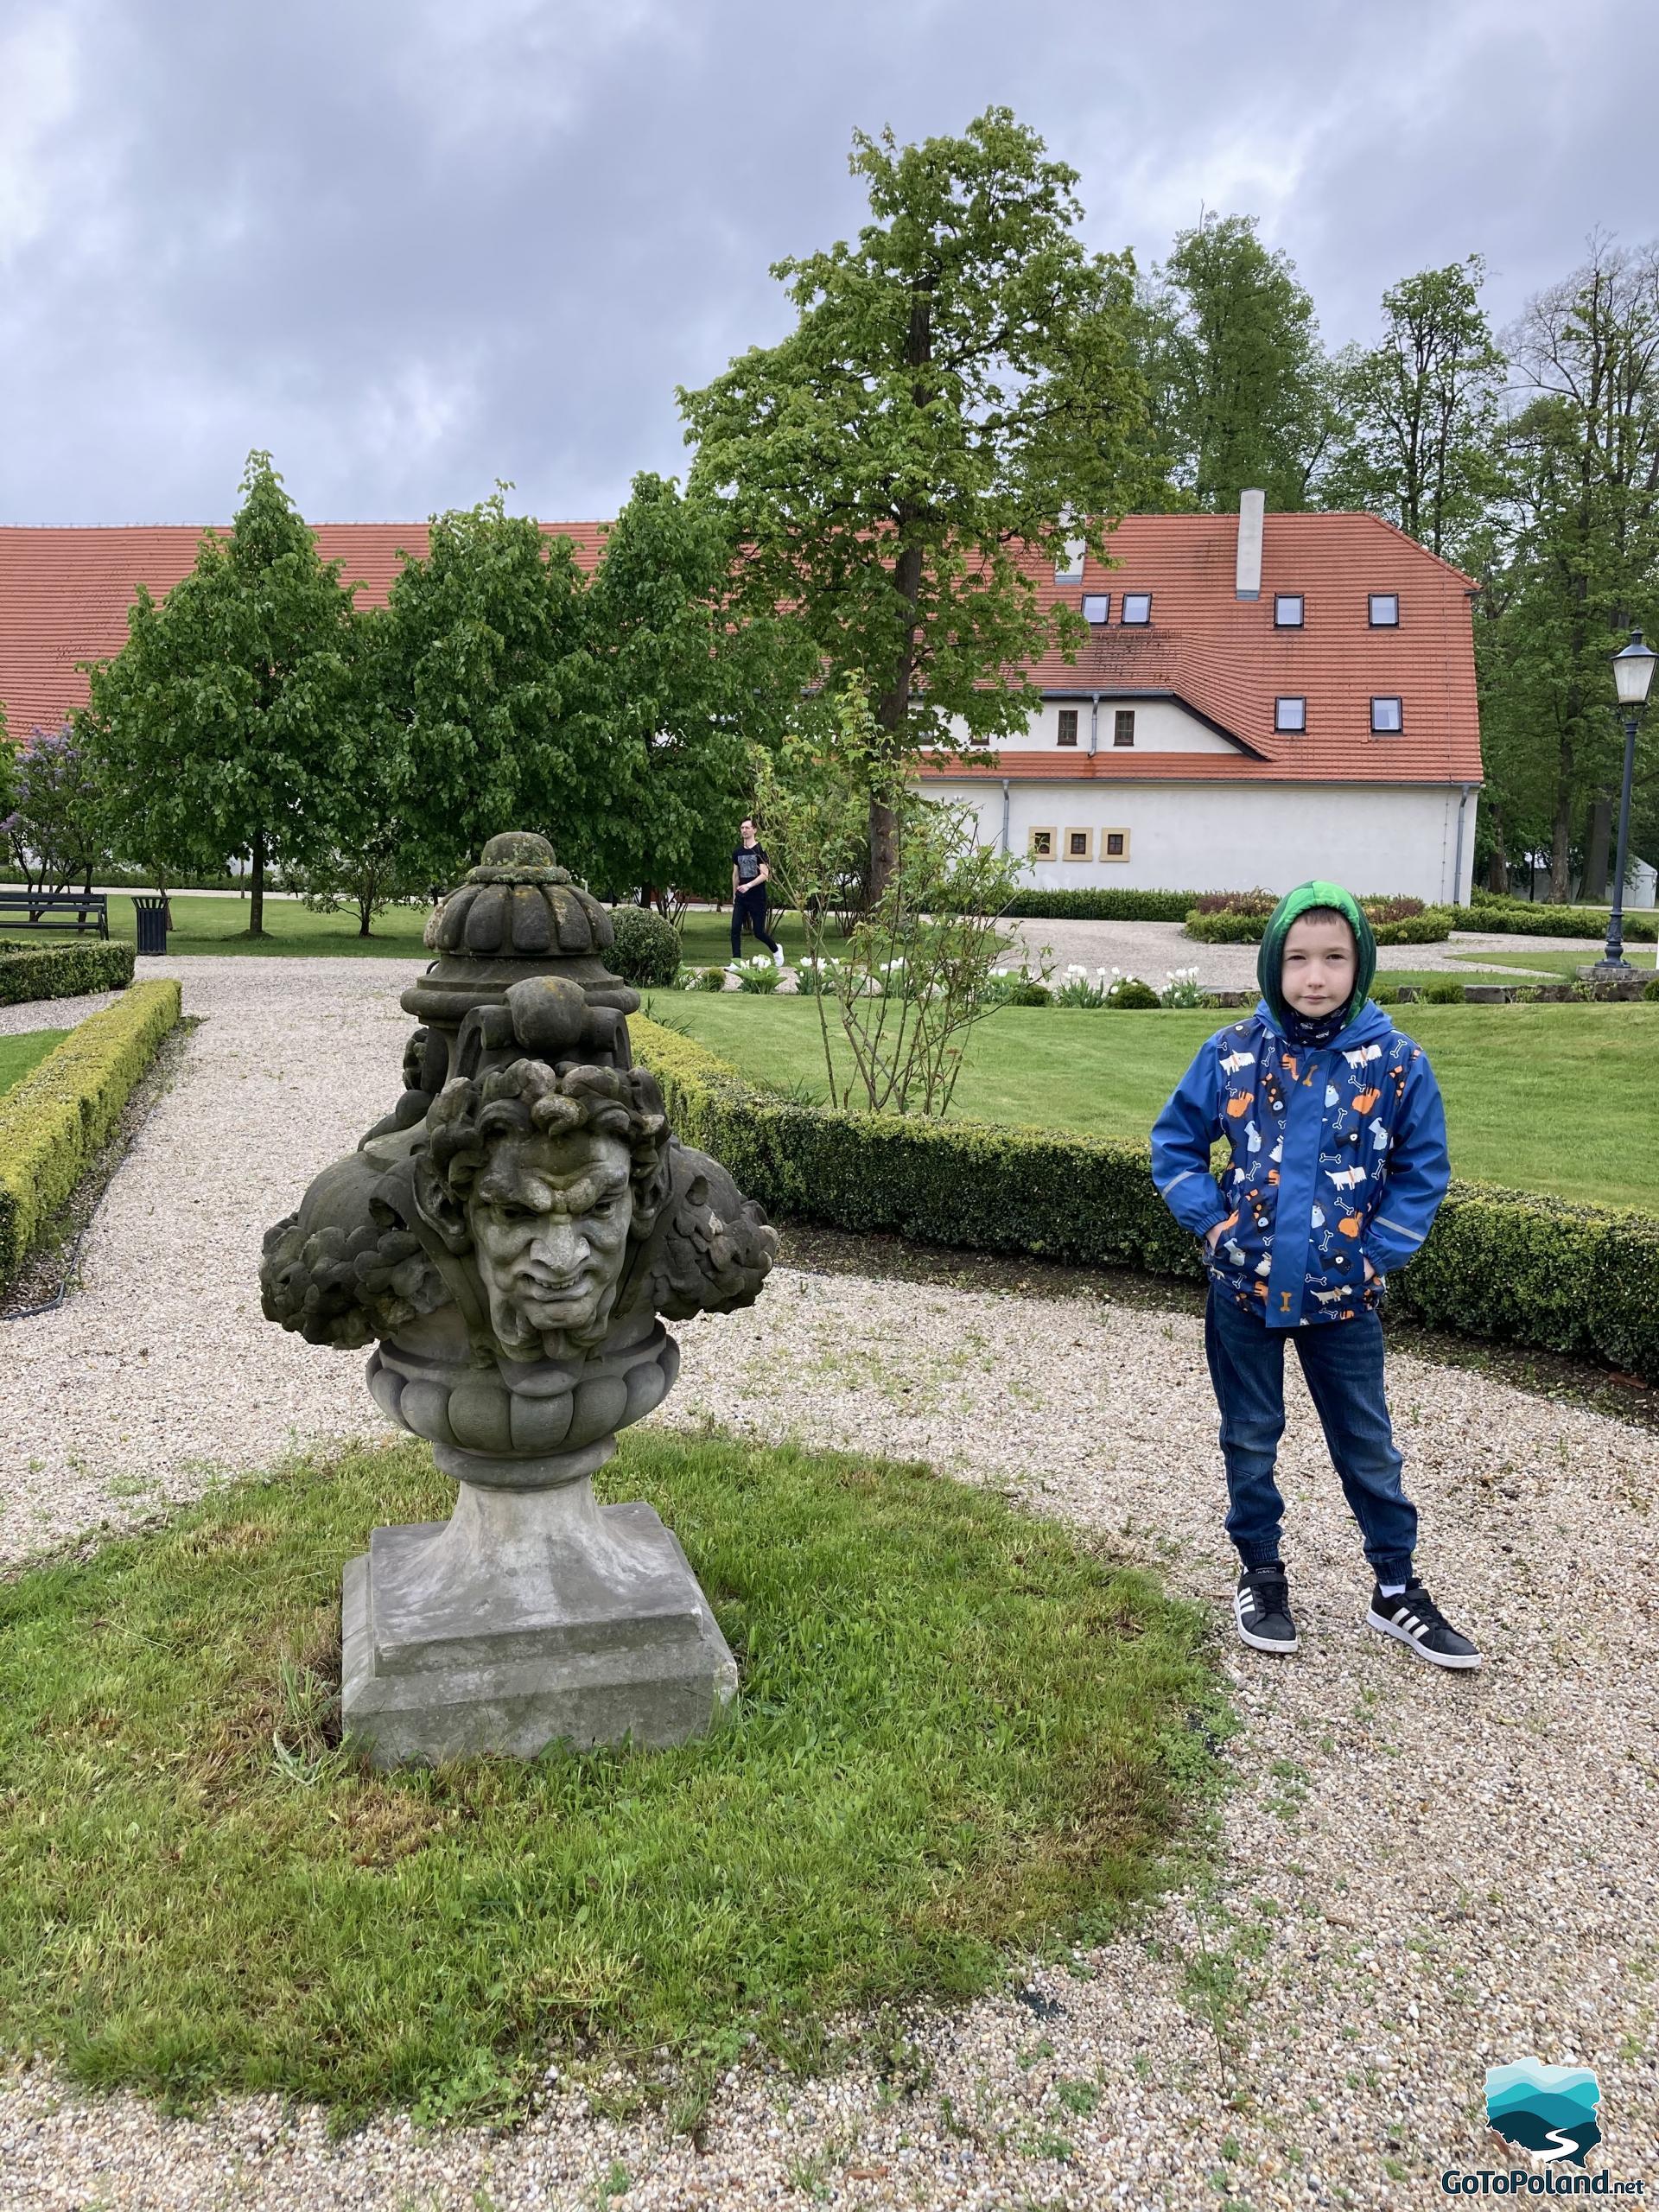 A boy is standing by the stone statue